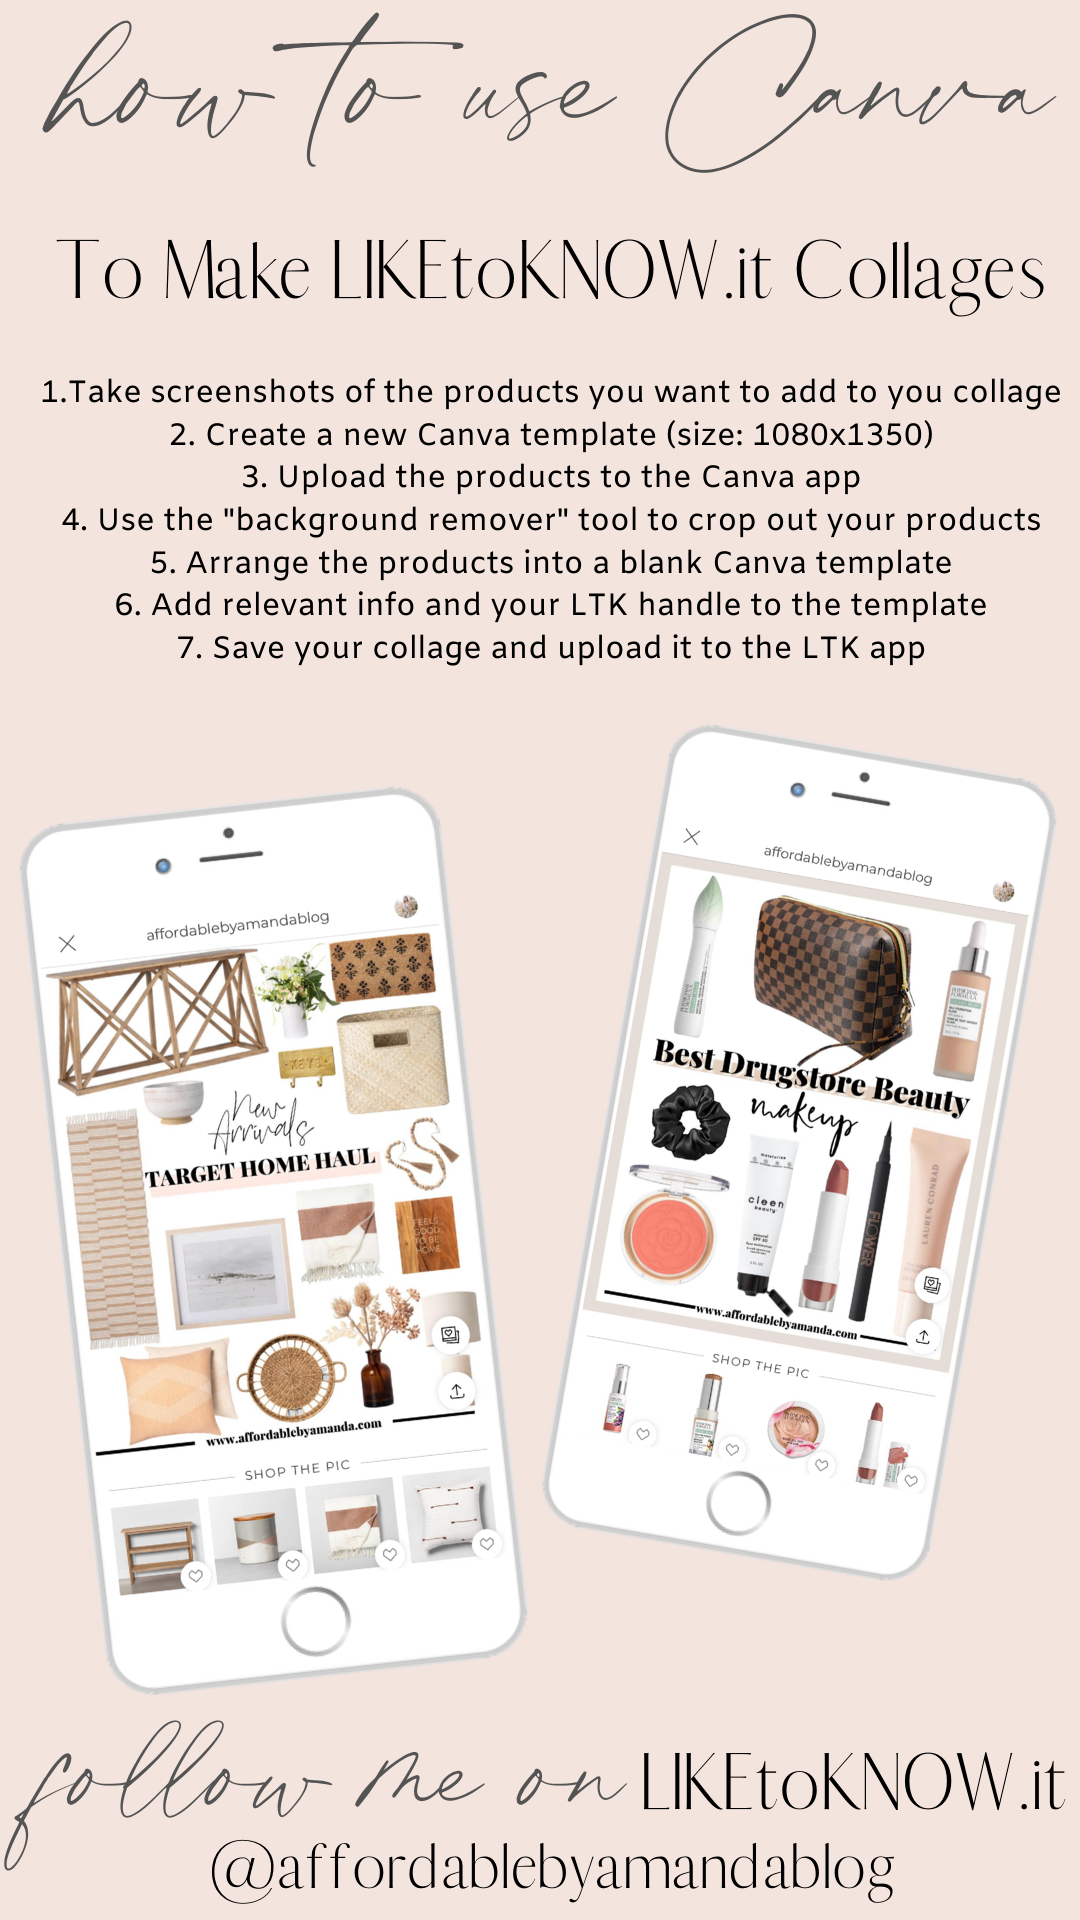 https://affordablebyamanda.com/wp-content/uploads/2020/09/How-To-Use-Canva-To-Make-Liketoknowit-Product-Collages.png